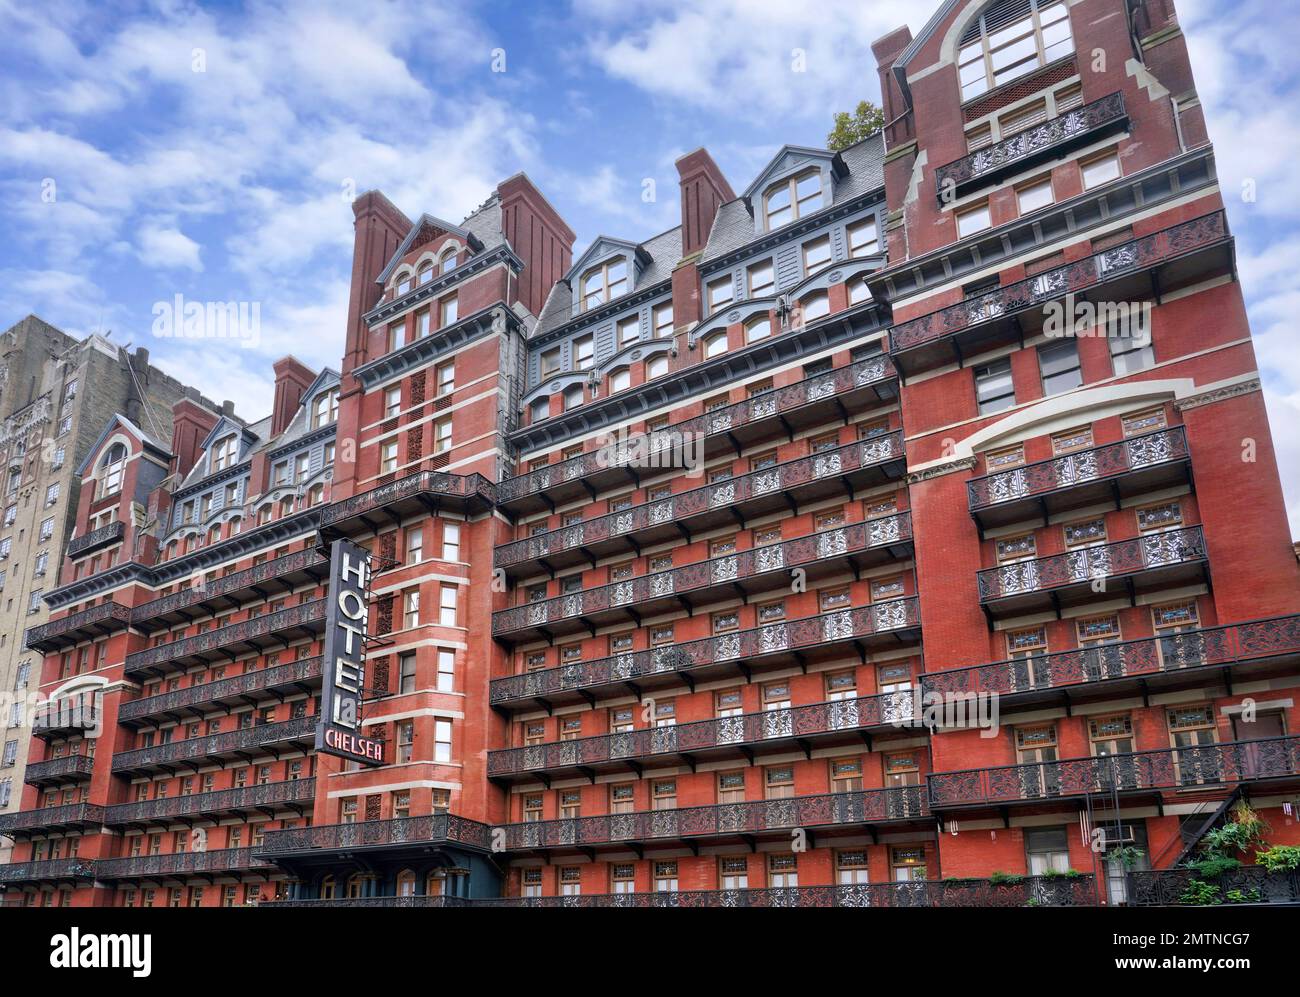 New York, NY- October 2022:  The Chelsea Hotel in Manhattan, a 19th century landmark famous for the writers and artists who have lived there. Stock Photo